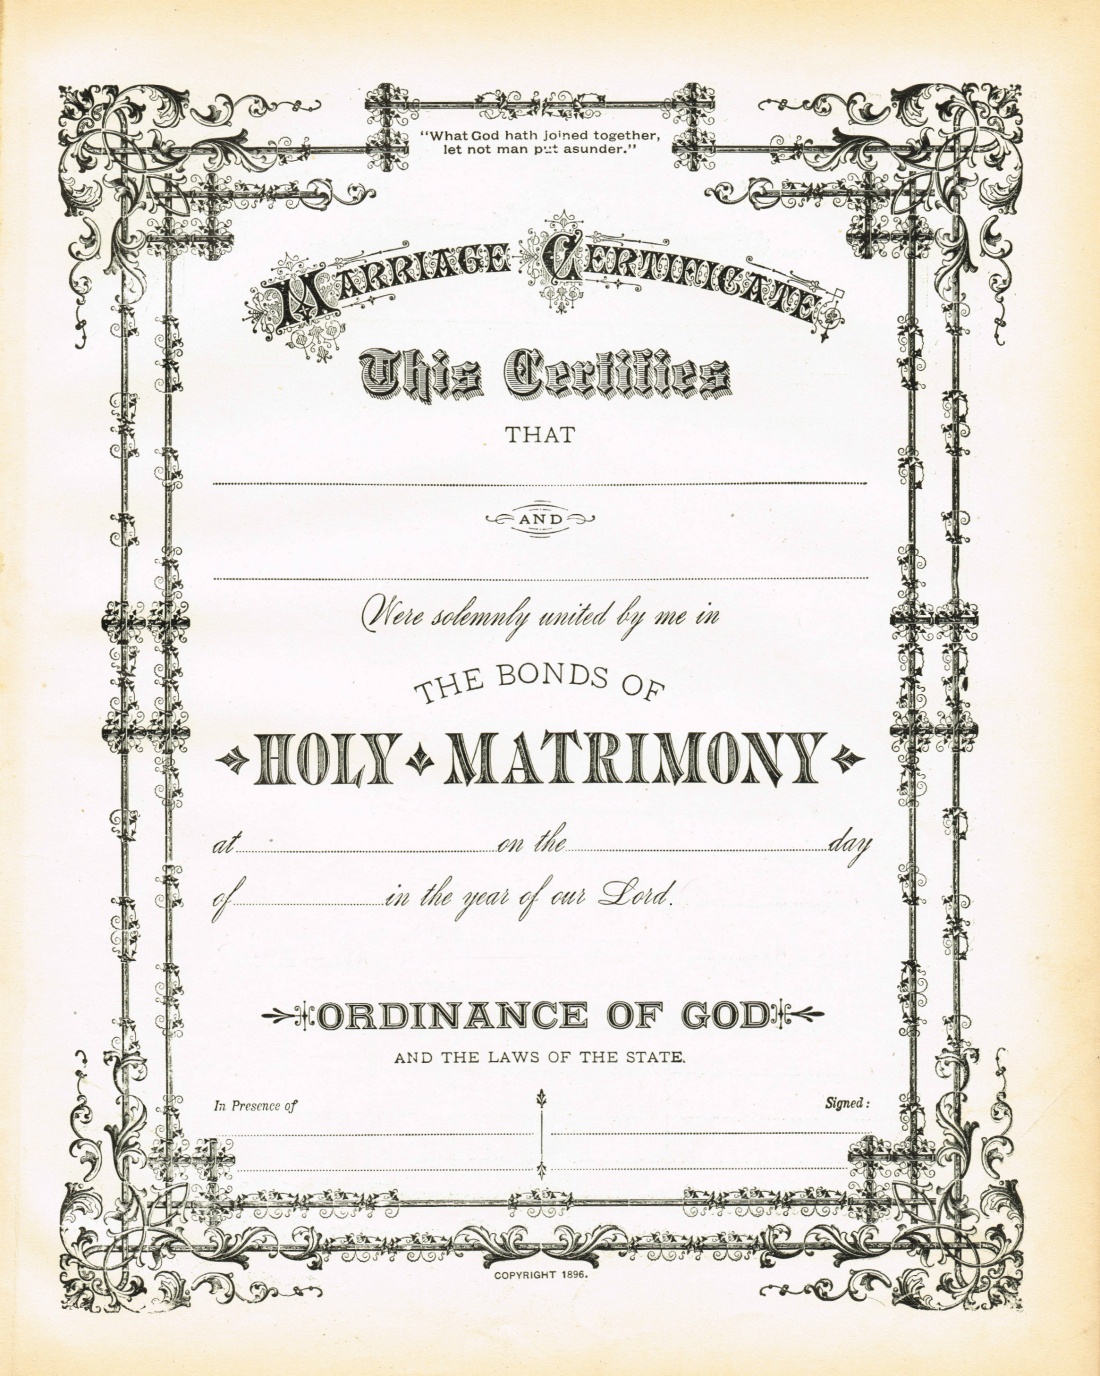 Antique Certificate Of Marriage Printable Via Knickoftime - Free Printable Wedding Certificates